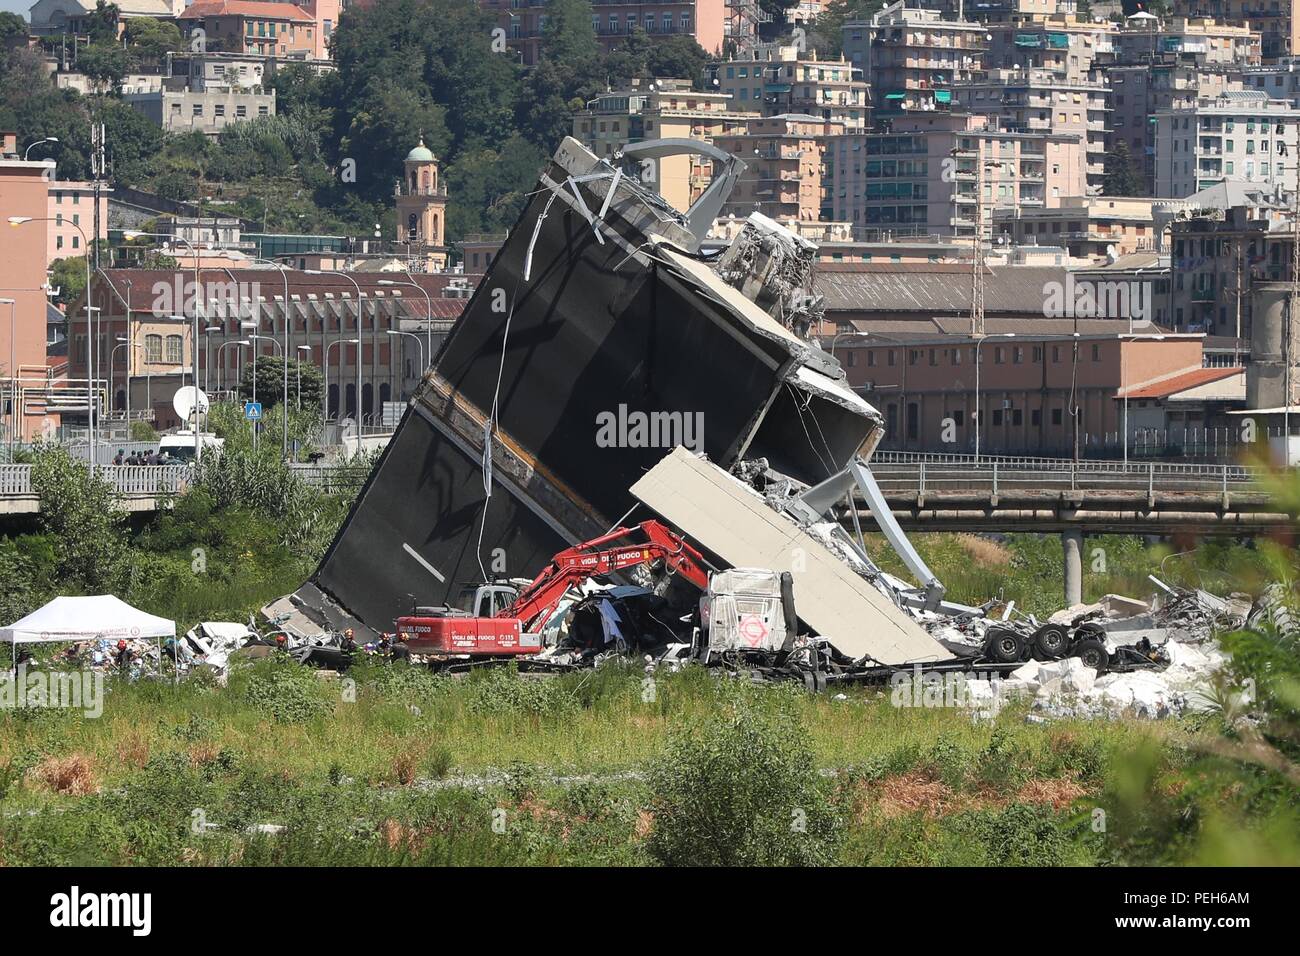 Genoa, Italy. 15th Aug, 2018. Heavy machines work at the site of the collapsed bridge in Genoa, Italy, Aug. 15, 2018. The region of Liguria surrounding the Italian northwest city of Genoa has officially filed a state of emergency request, after the dramatic collapse of a major bridge on Tuesday that caused so far 39 victims, the regional governor said on Wednesday. Credit: Zheng Huansong/Xinhua/Alamy Live News Stock Photo